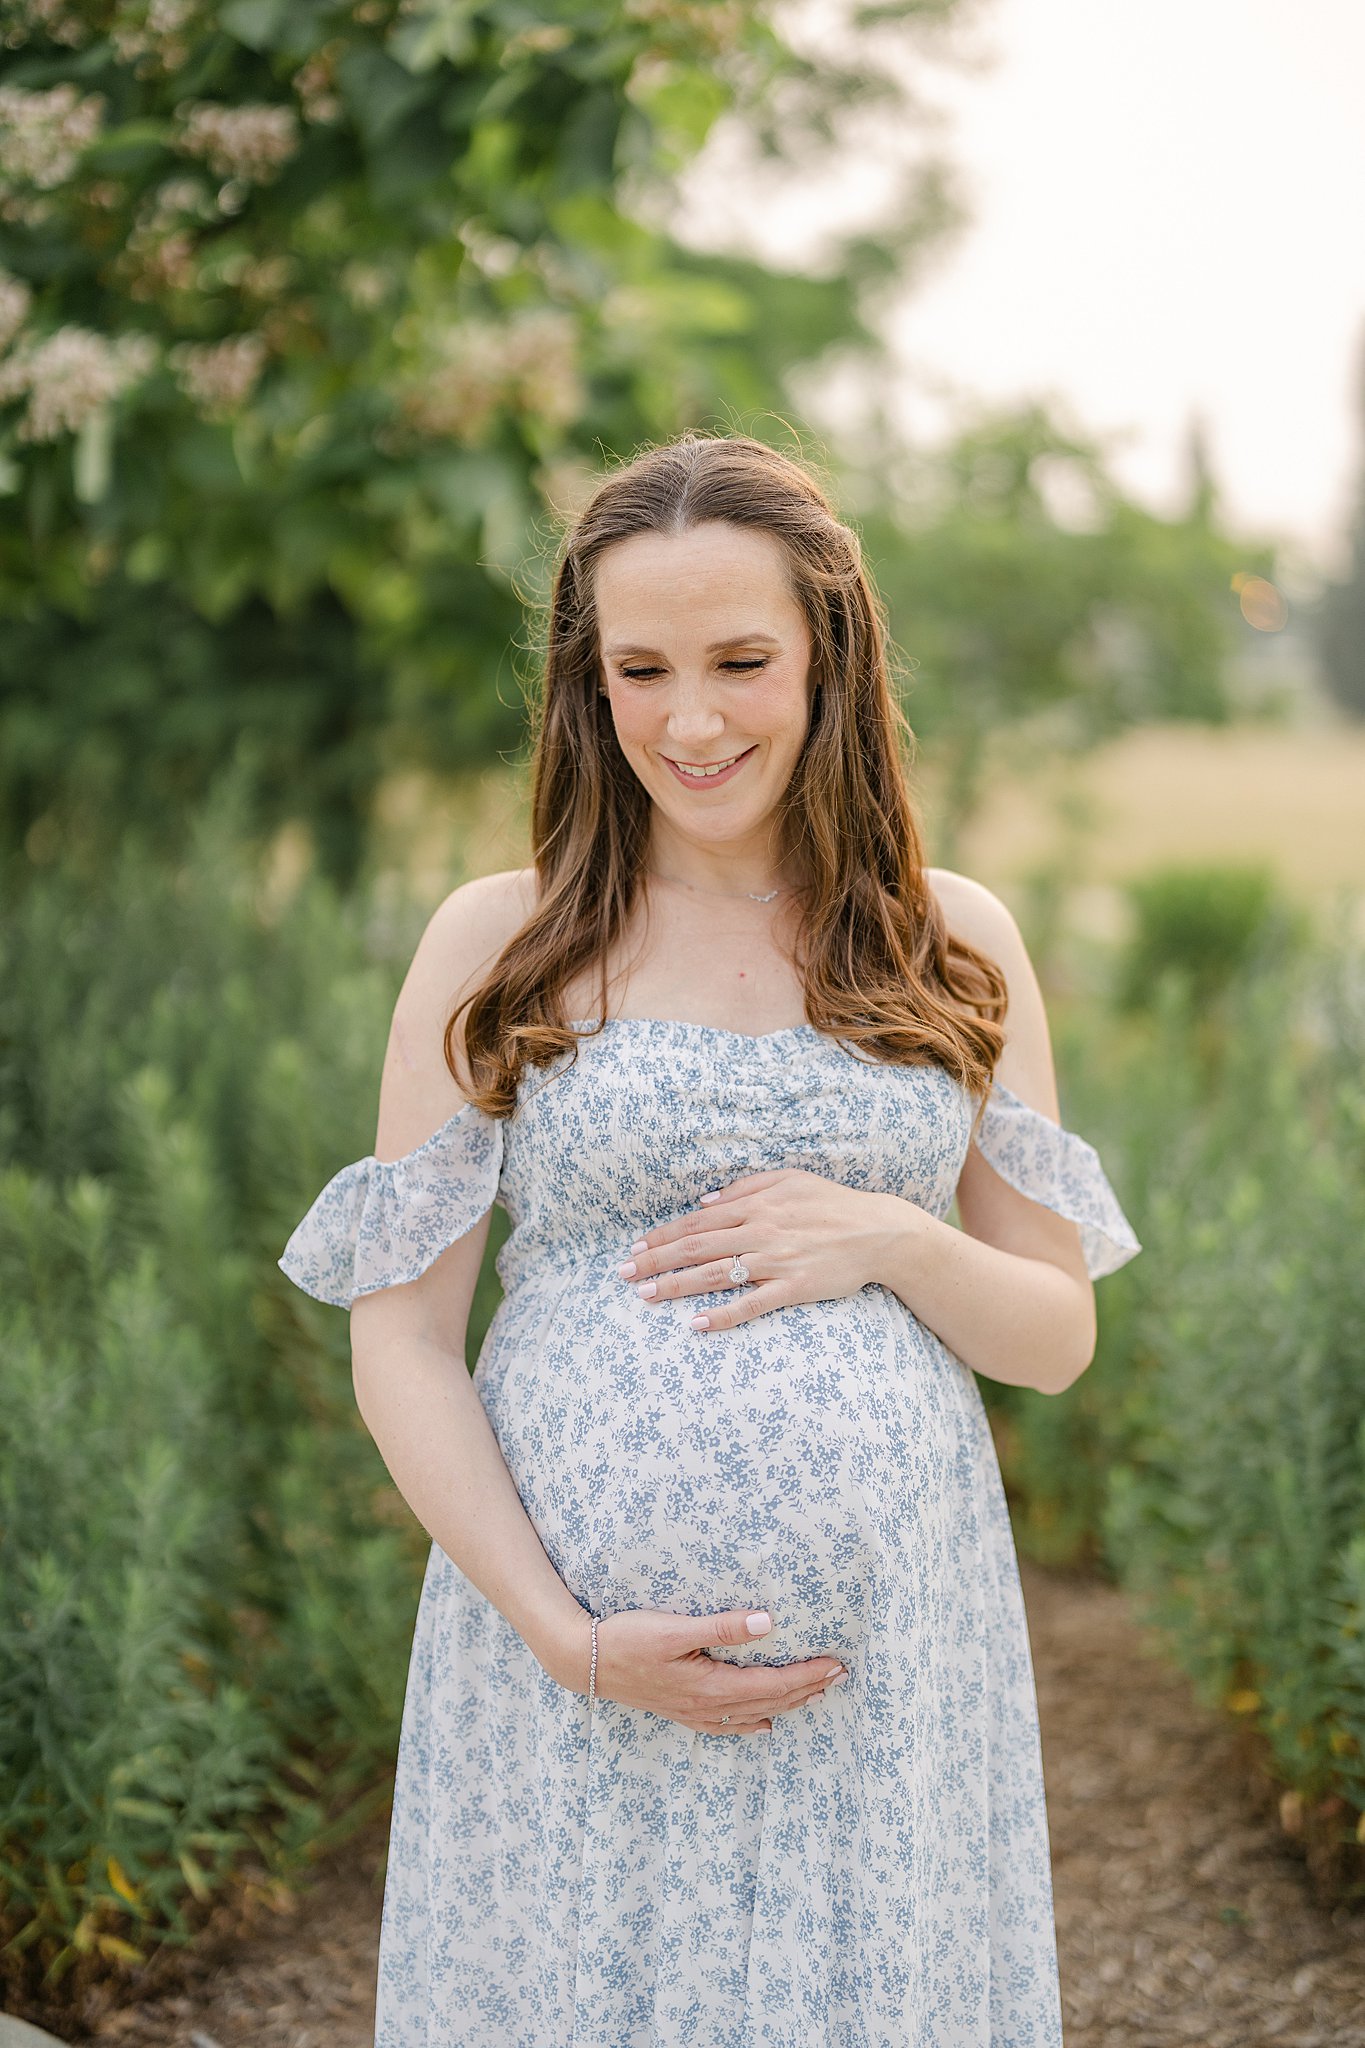 A happy expecting mom stands in a park trail holding her bump in a blue floral print dress after some Indianapolis prenatal yoga